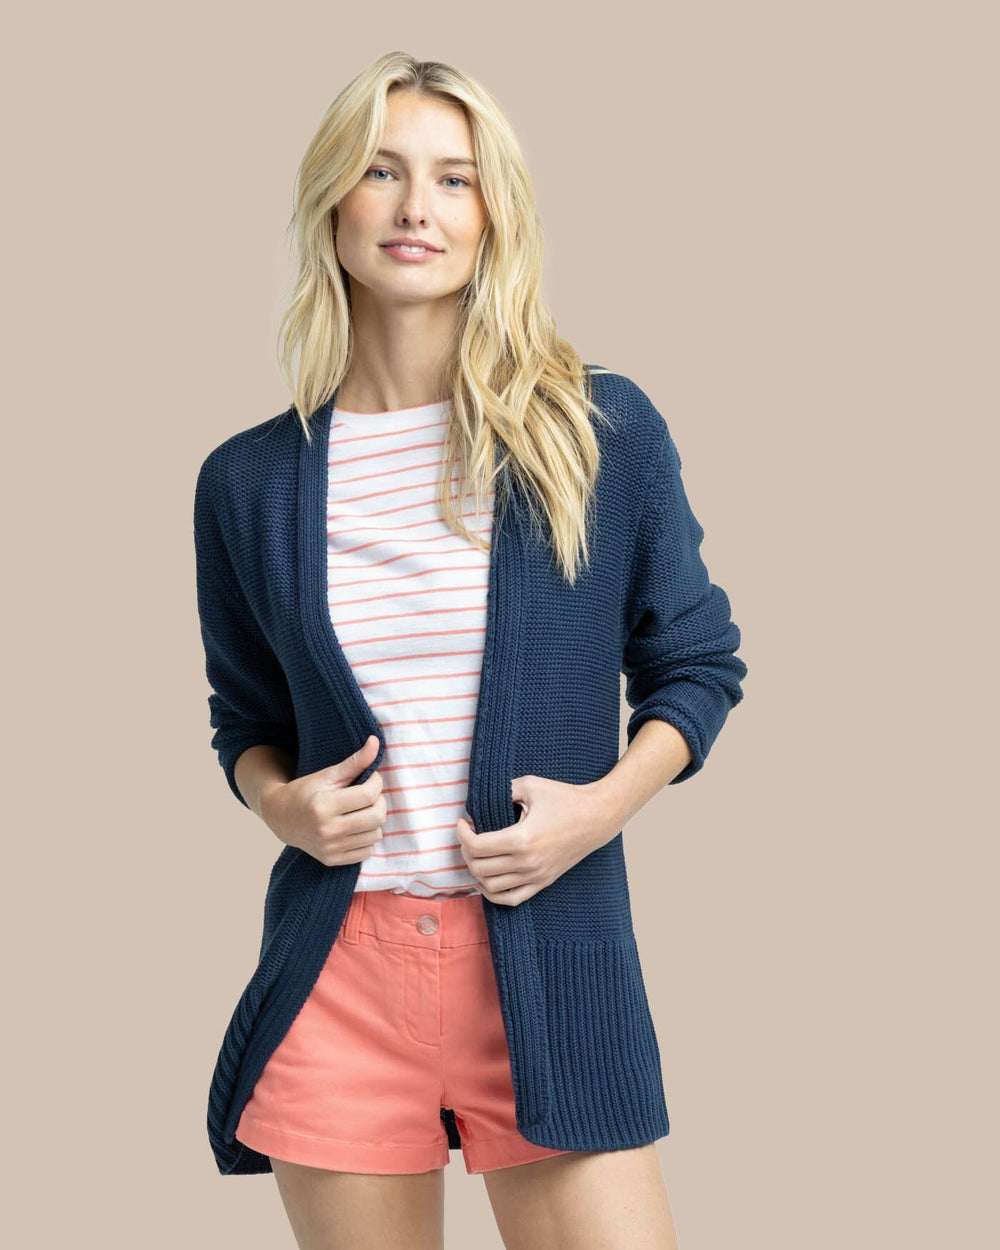 The front view of the Southern Tide Marren Cardigan by Southern Tide - Dress Blue